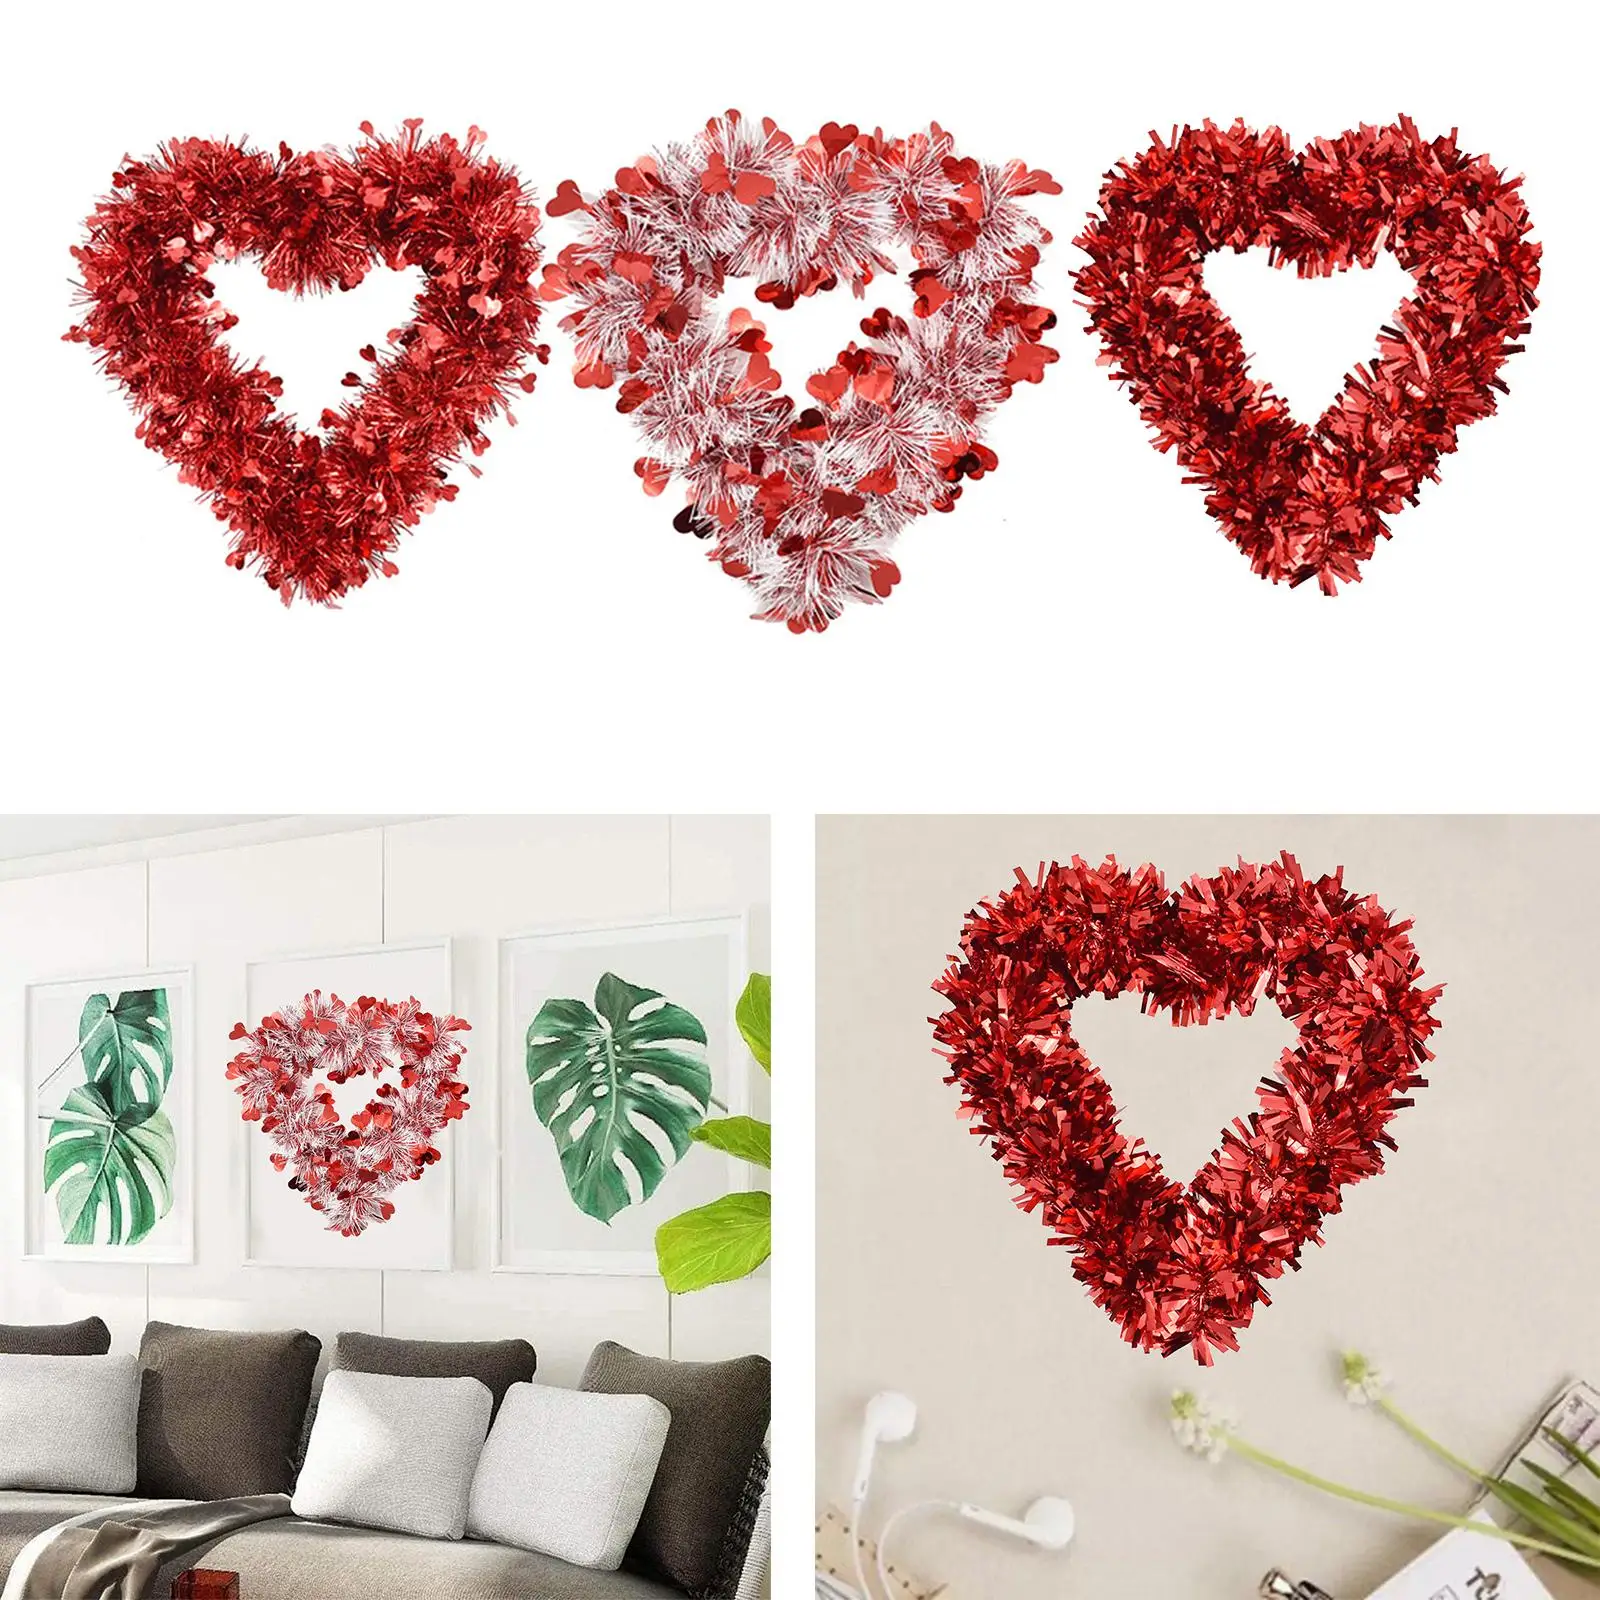 Valentine Heart Wreath Red Tinsel Heart Shaped Garland for Front Door Wall Valentine's Day Wreath Decorations